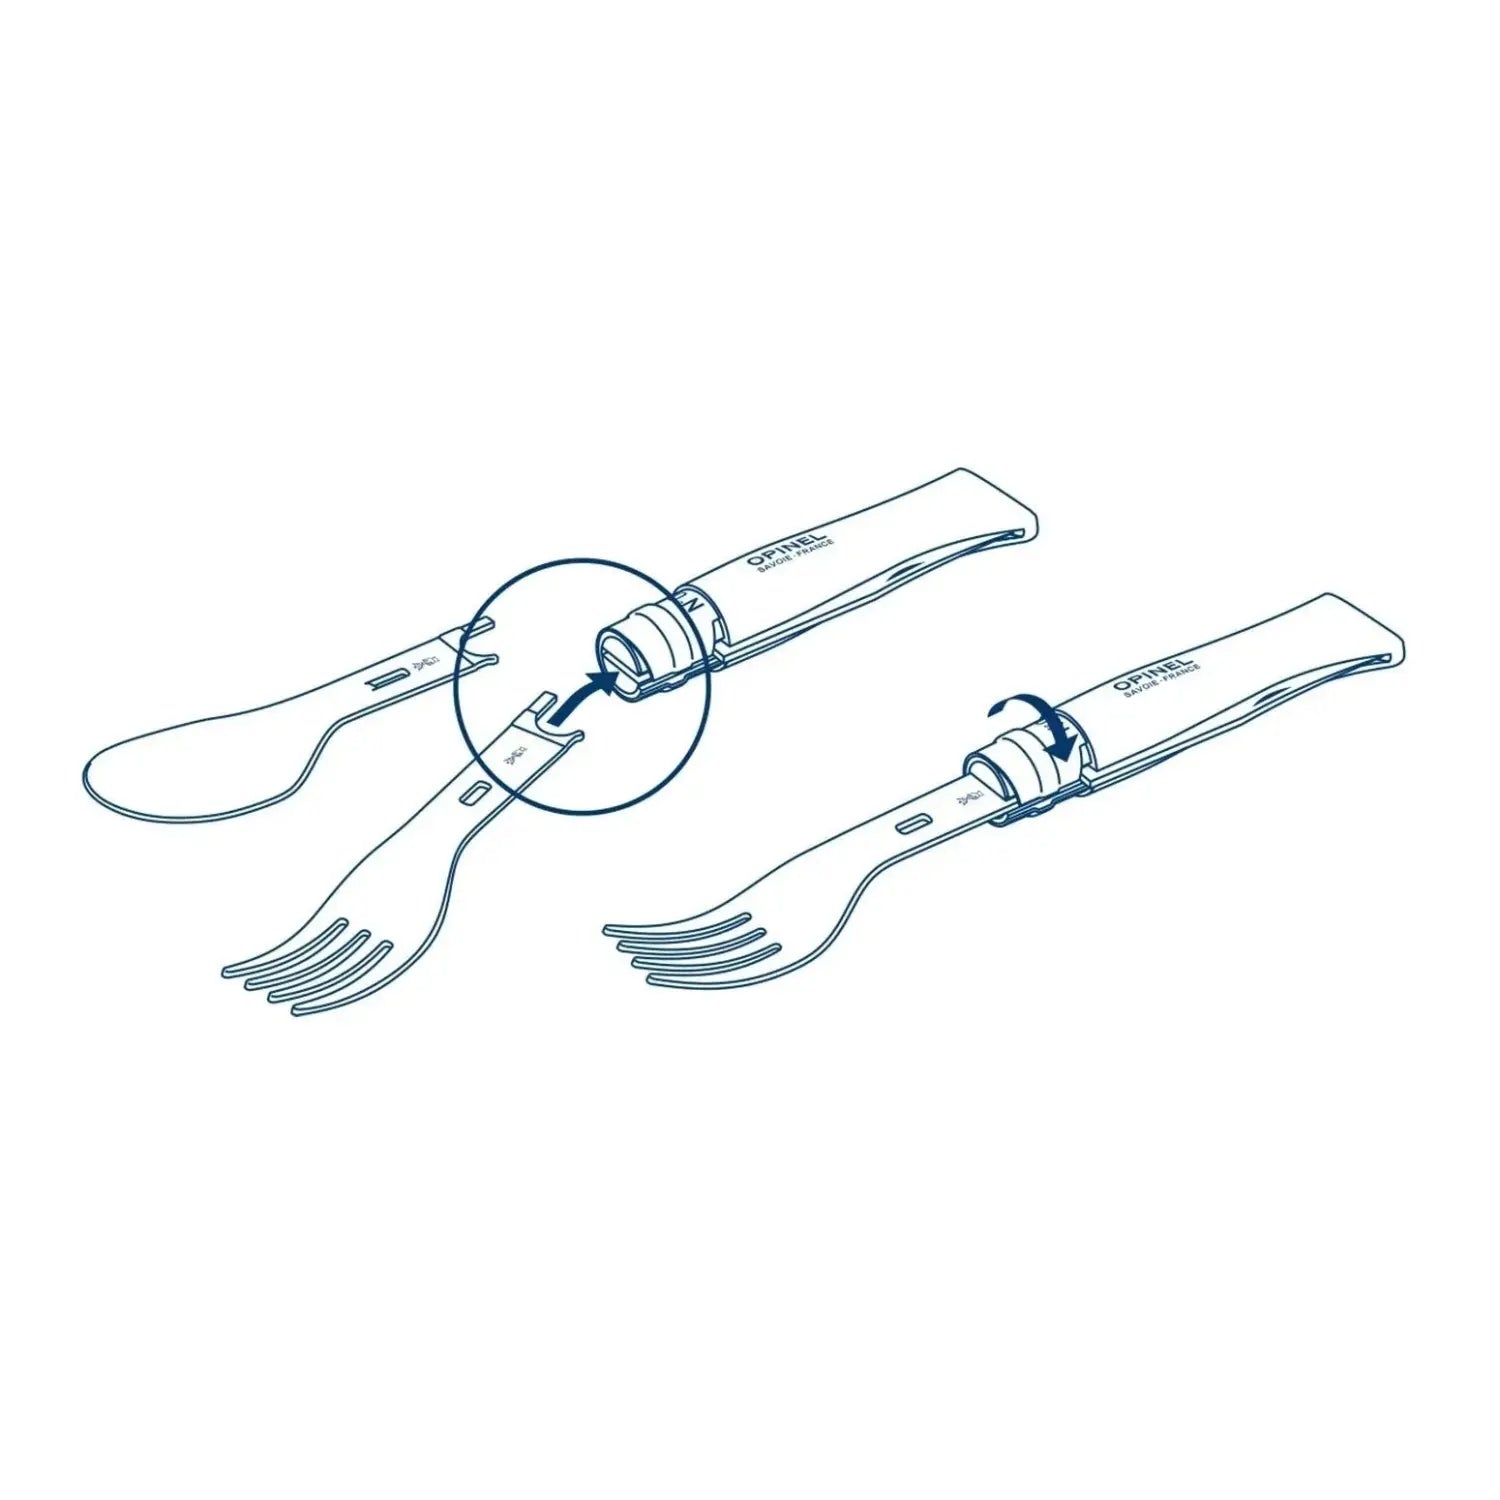 Opinel Picnic+ Cutlery Insert Set Inserting Instructions